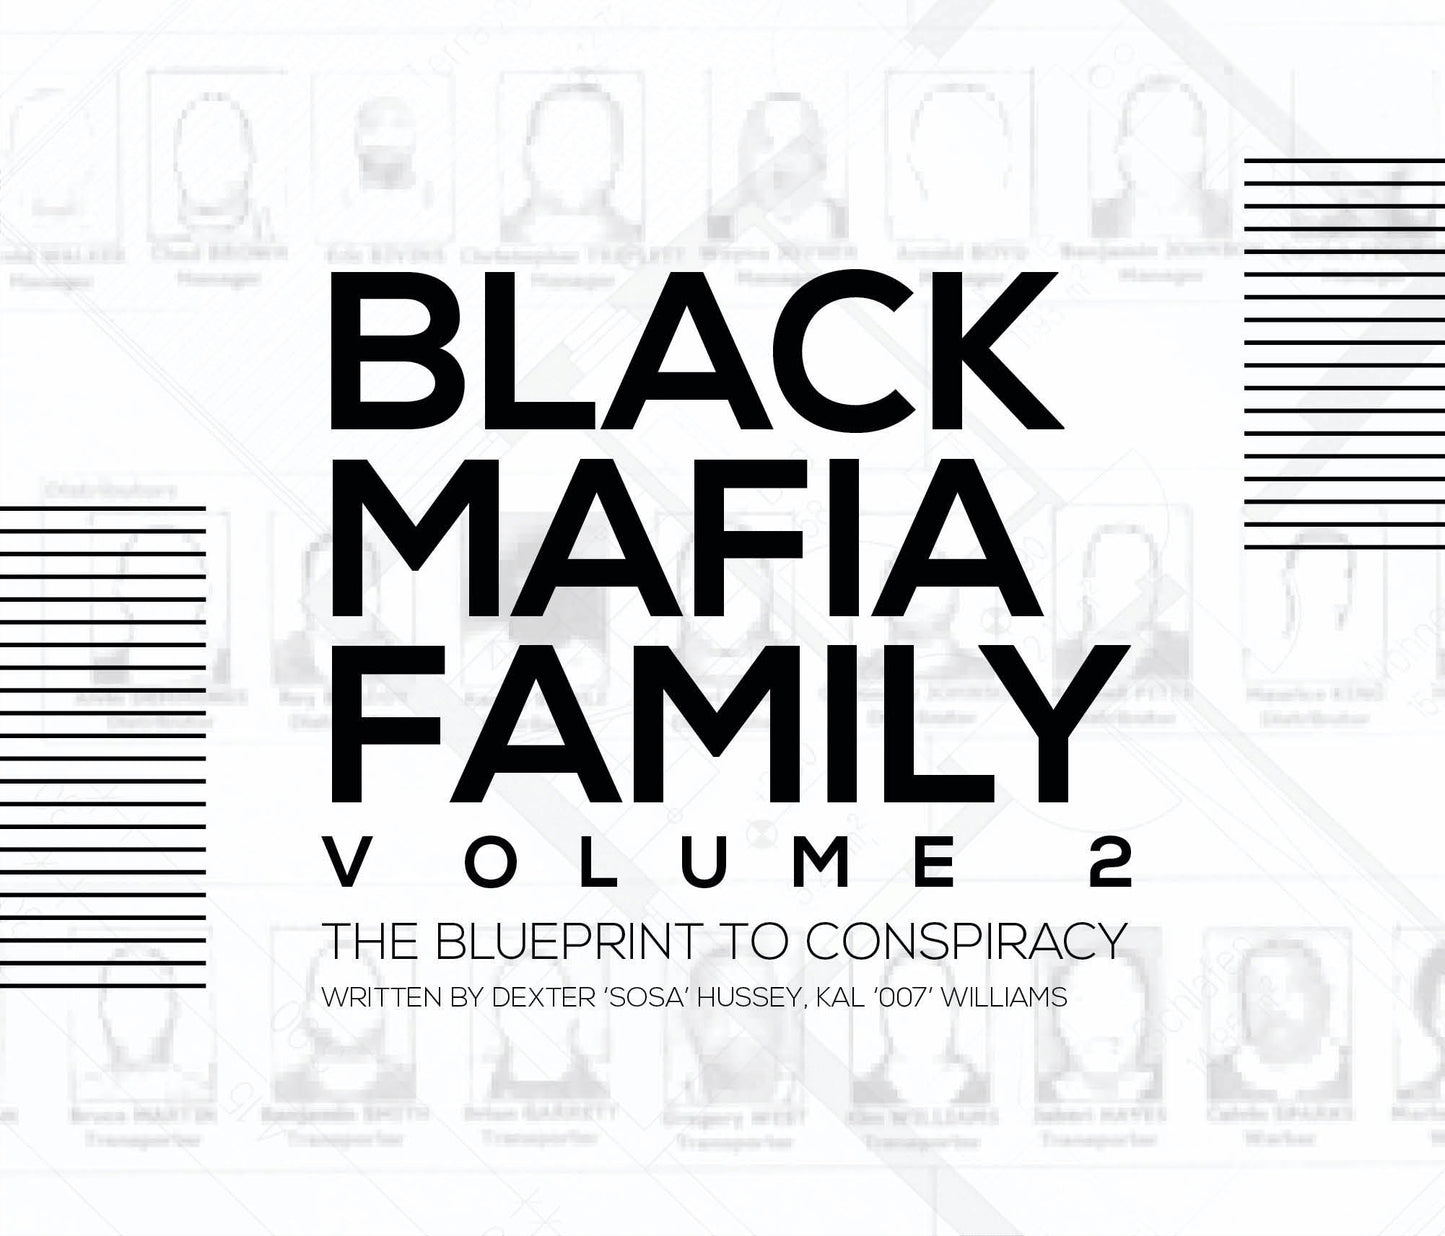 BMF BLACK MAFIA FAMILY "The Blueprint to Conspiracy" Volume 2 Collectors Edition